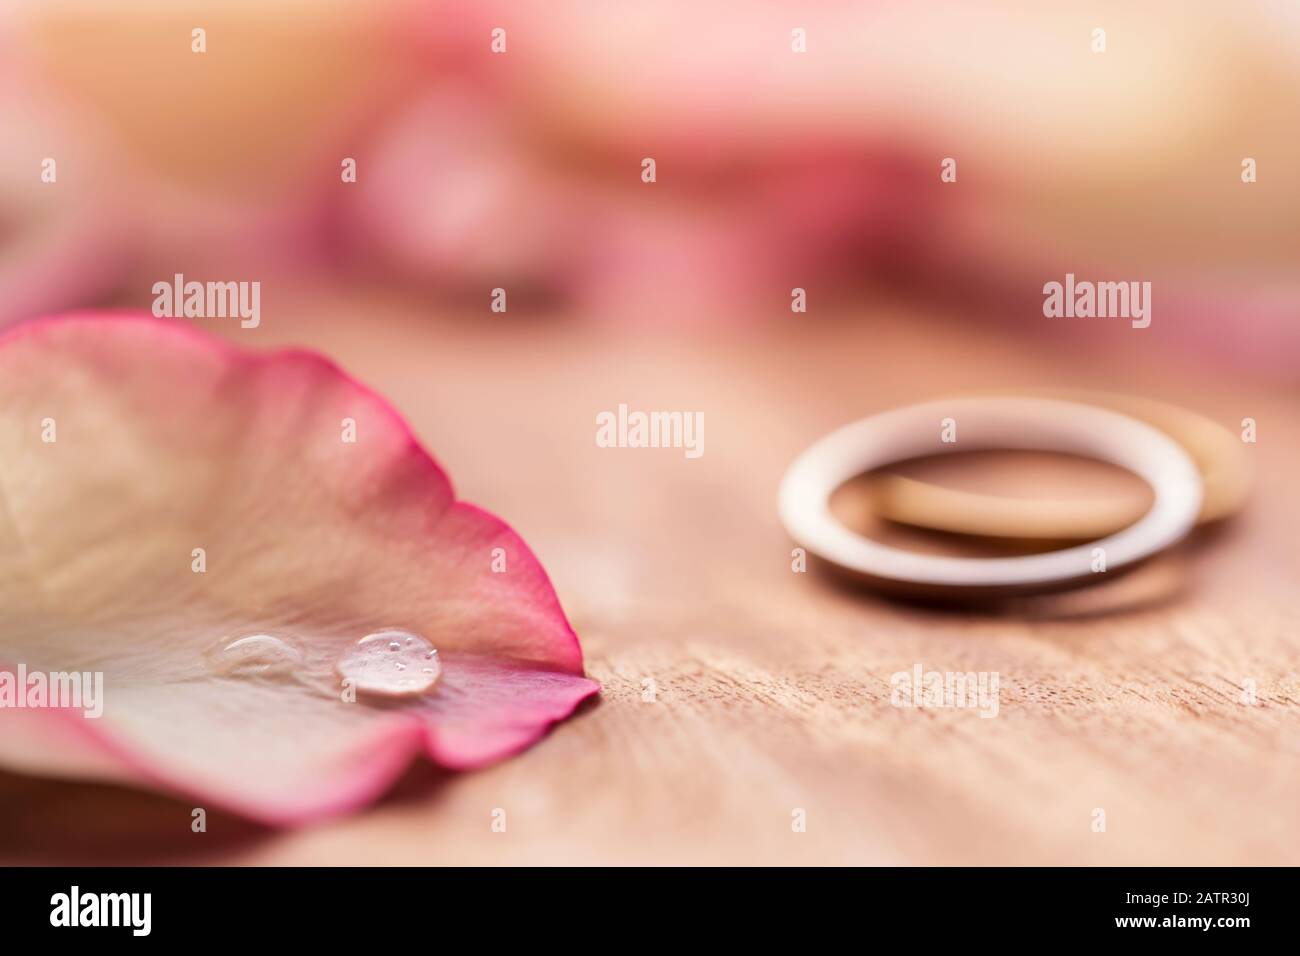 valentines day proposal rings for wedding anniversary engagement background close up of water drop on pink rose petal for invitation card post 2ATR30J